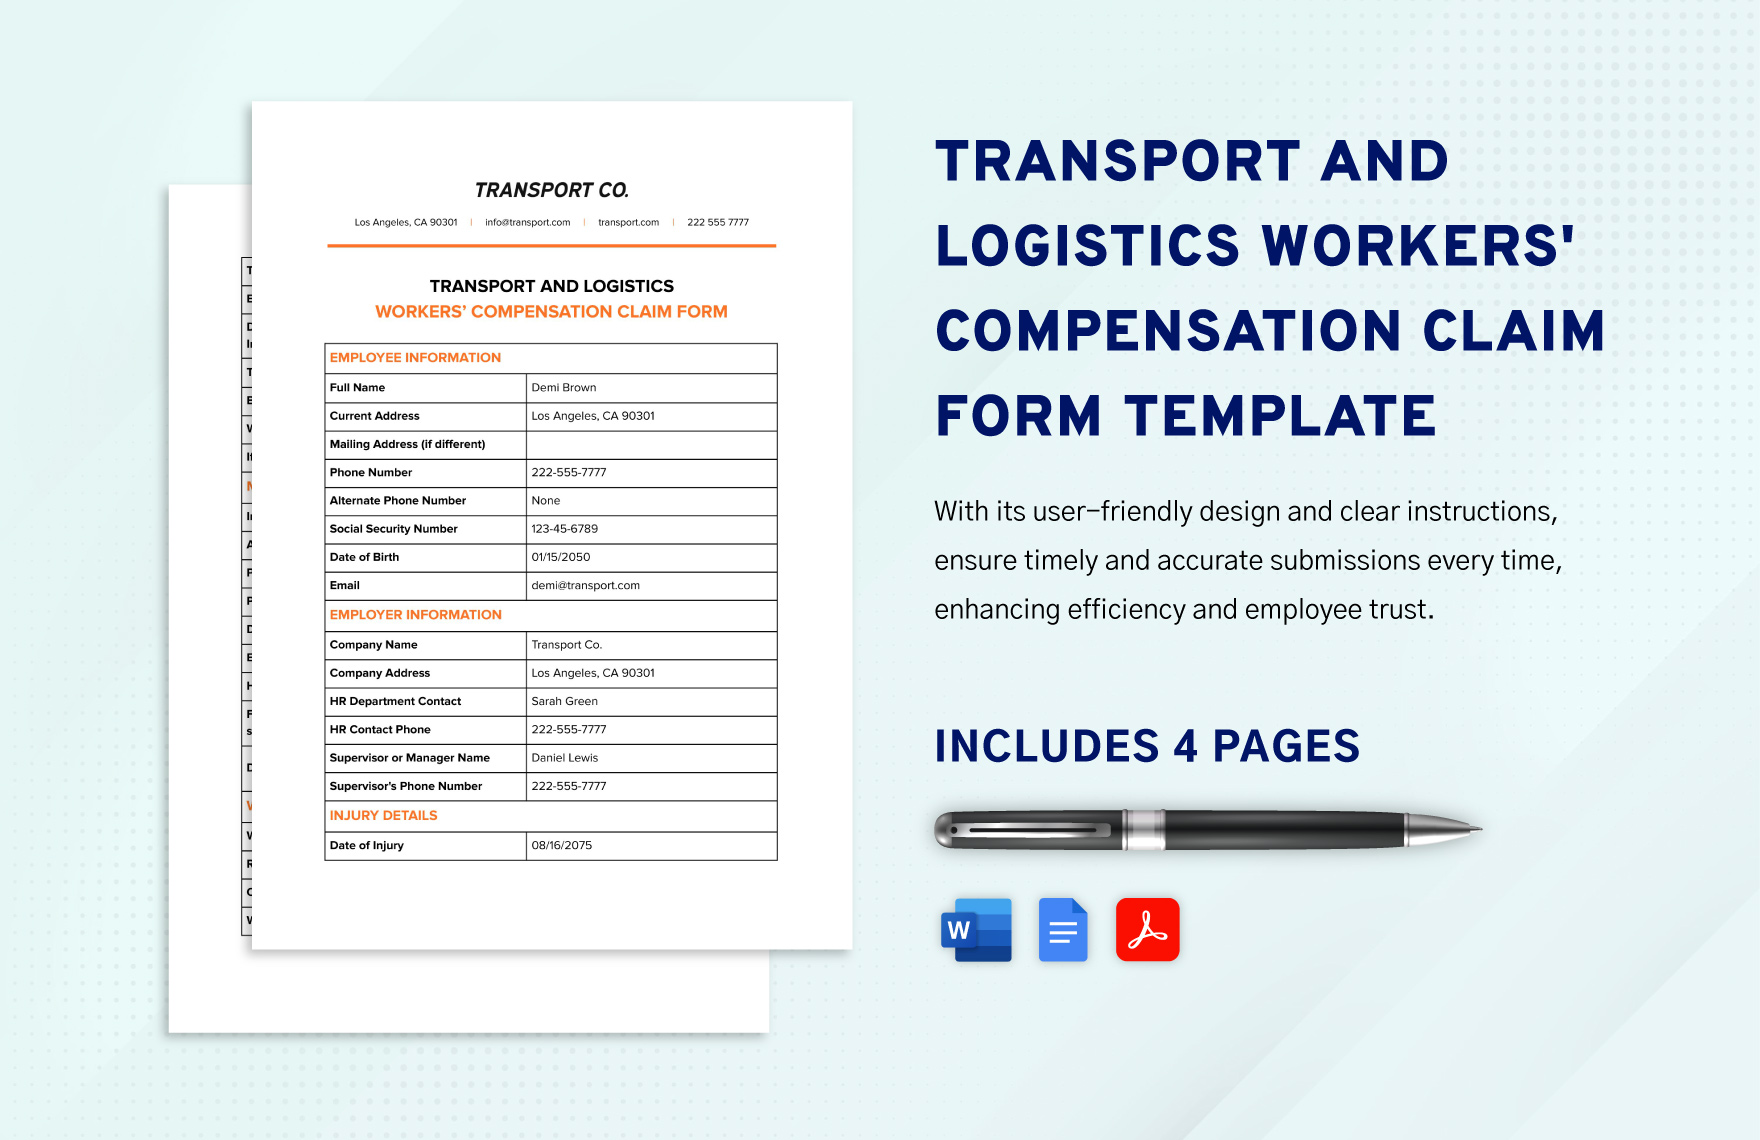 Transport and Logistics Workers' Compensation Claim Form Template